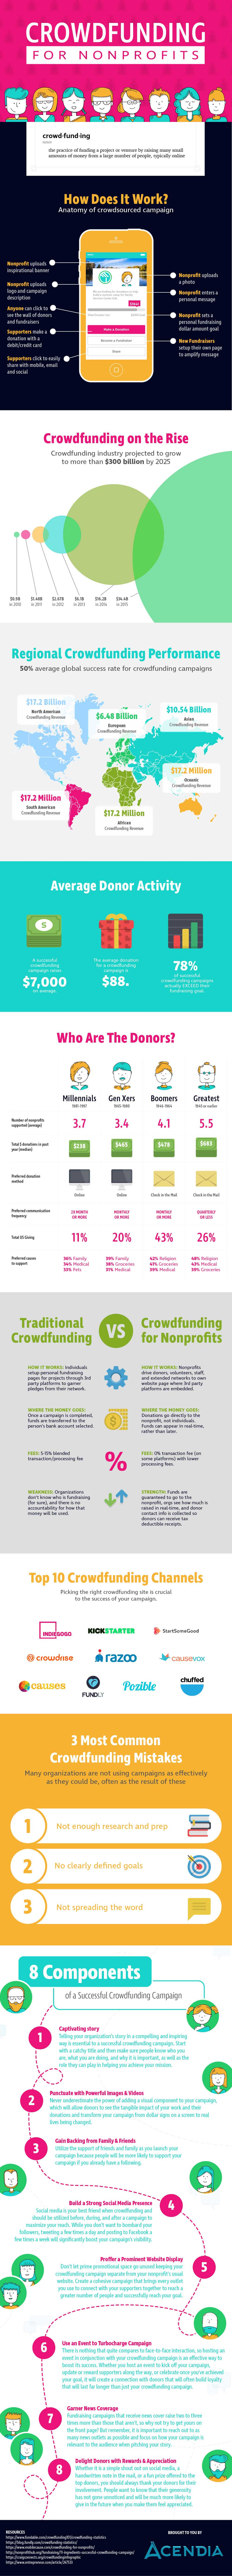 The Quintessential Crowdfunding Guide for Nonprofits